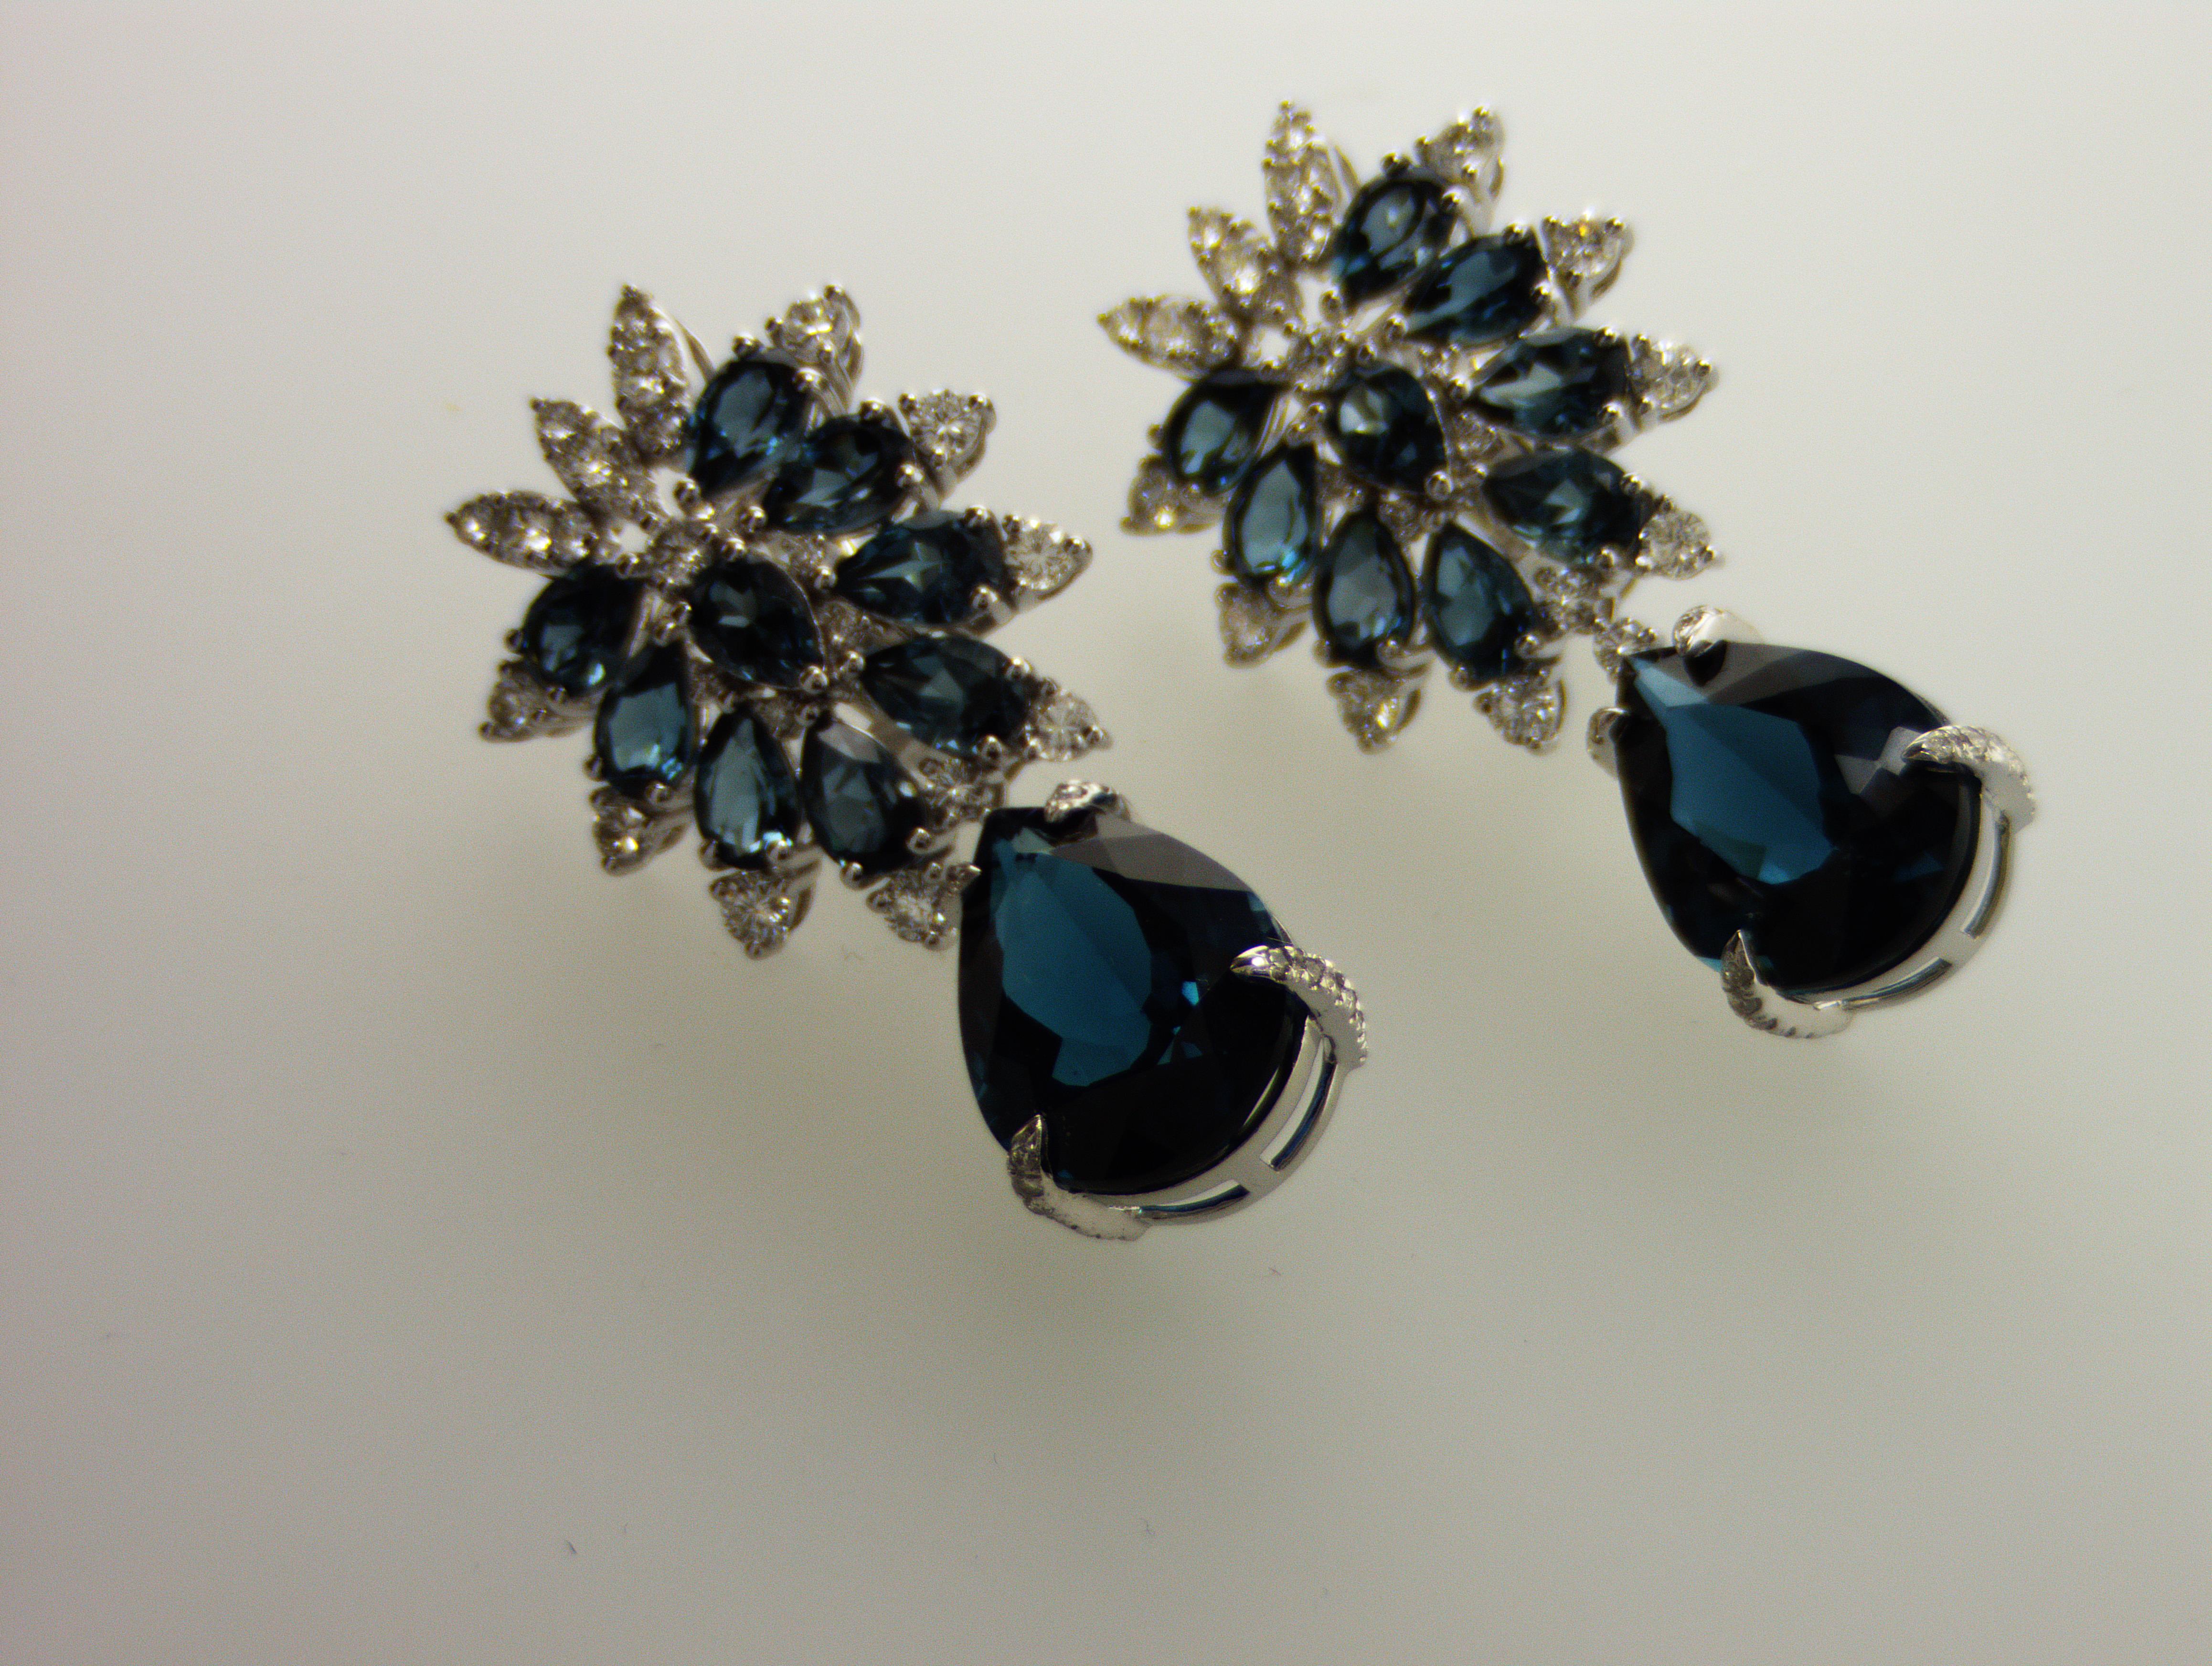 Amazing IDL certified London Blue Topaz (26.97 ct.) and Diamonds (2.33 ct) Earrings. These earrings outstandingly looks, London blue topaz has a very specific , inky shade of blue and it is darker then regular topaz but lighter then a sapphire.